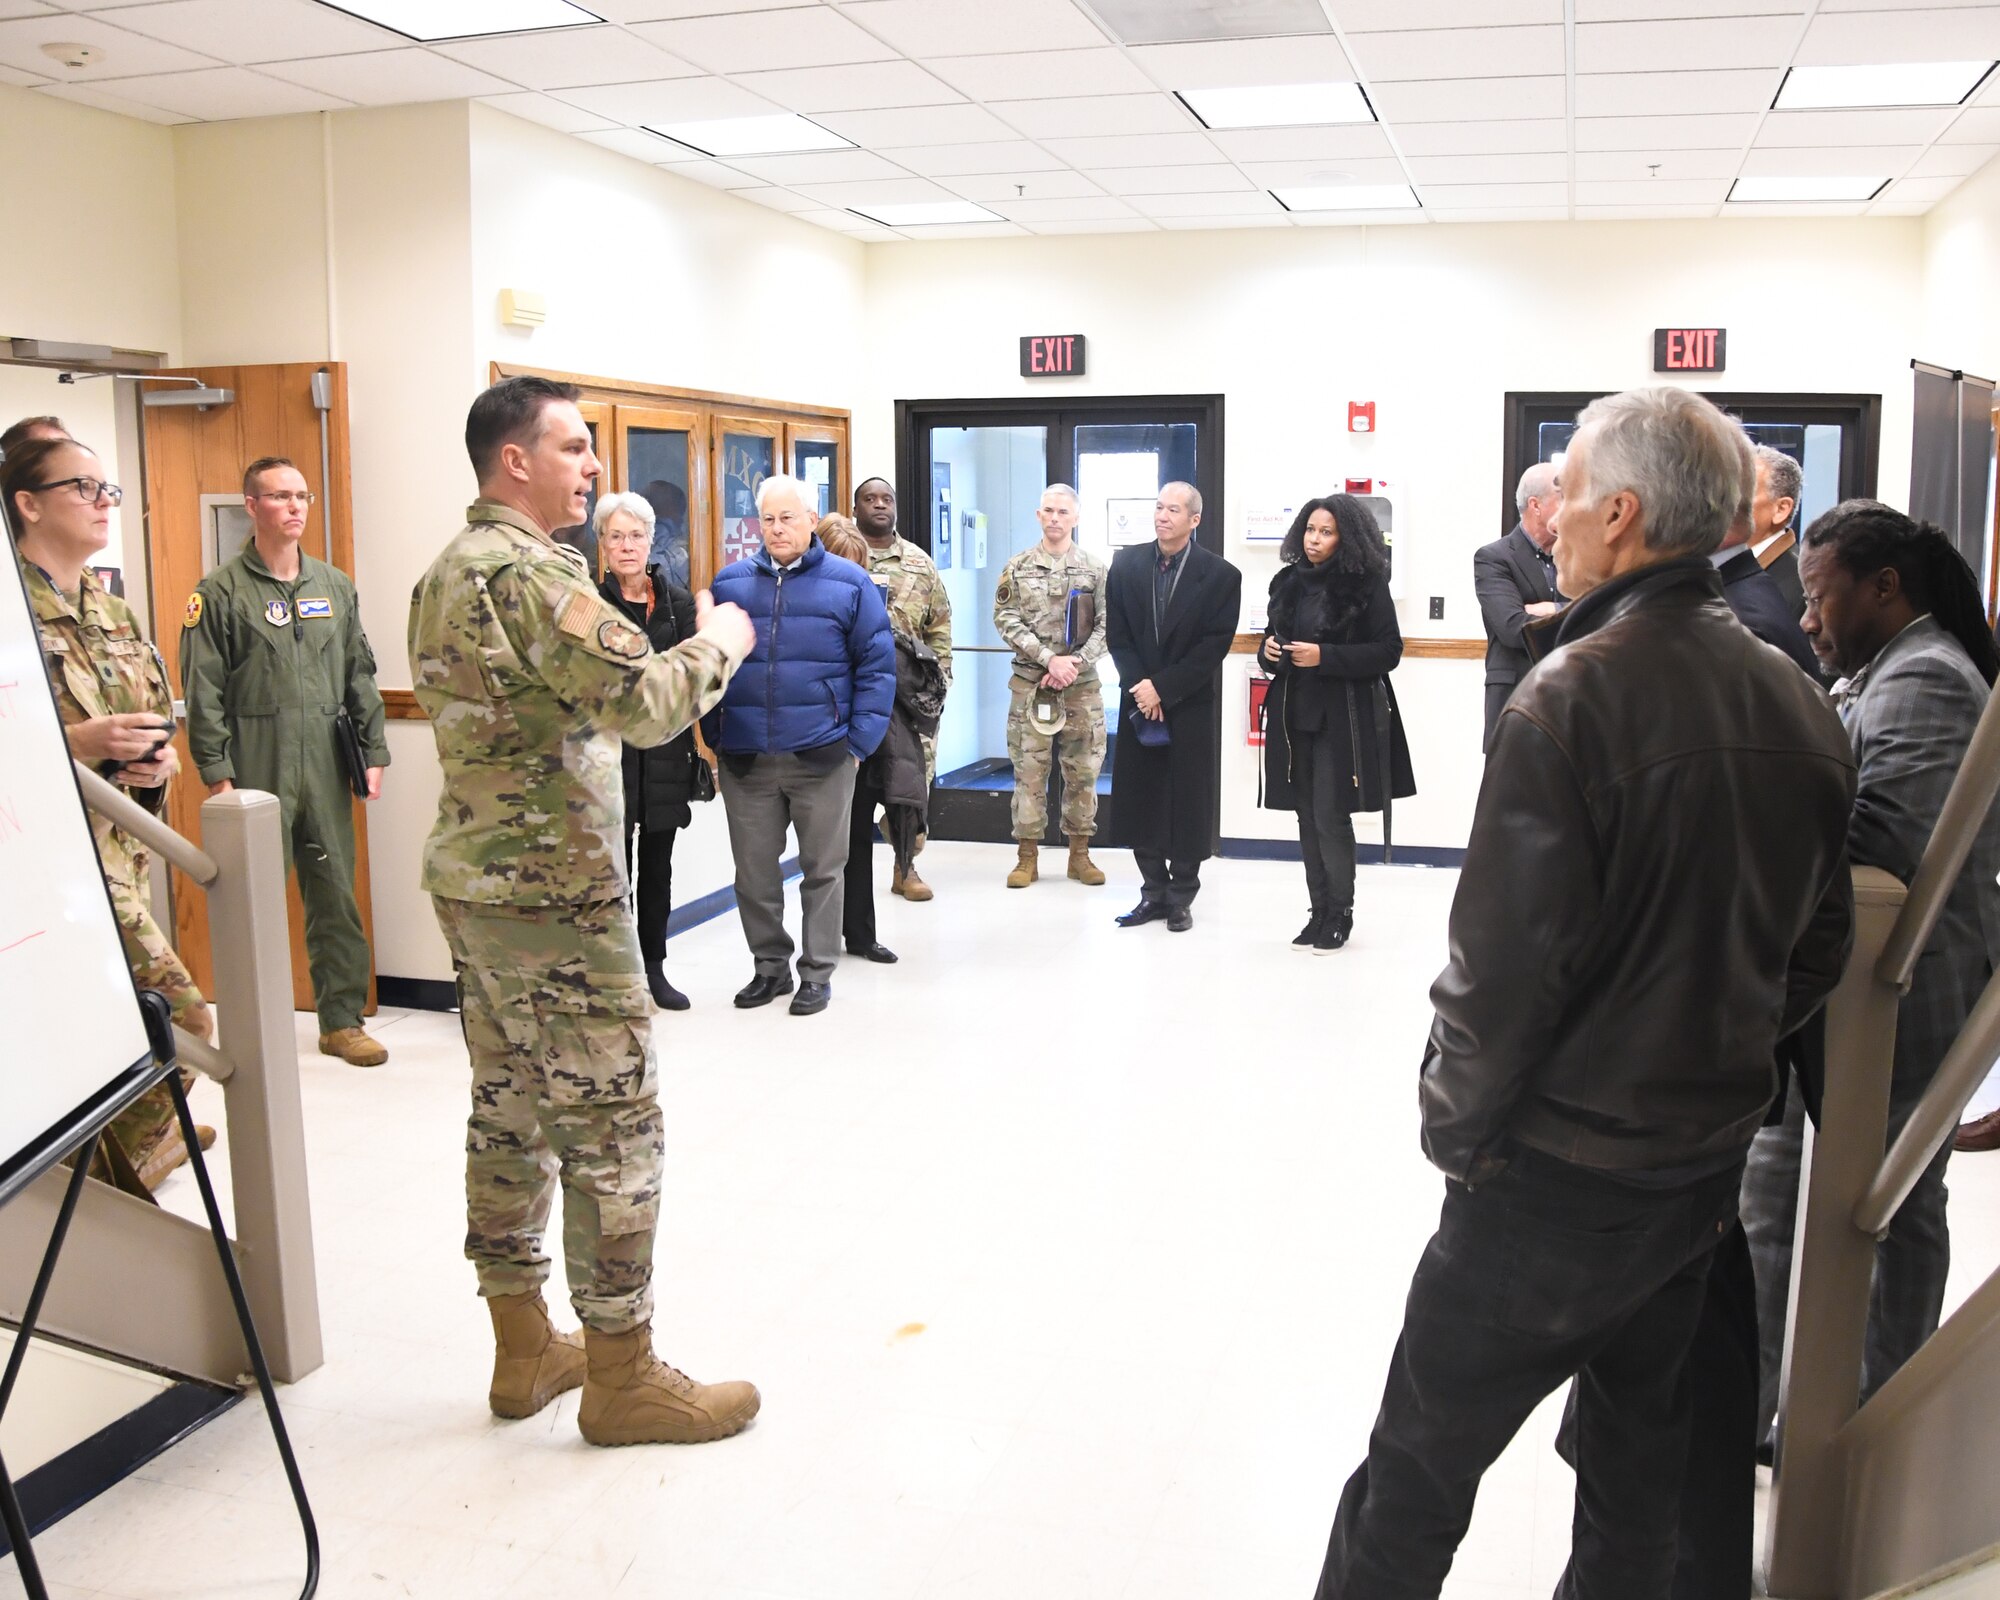 Lt. Col. Robert Flemming, 459th Aerospace Medicine Squadron Commander, prepares Defense Health Board members for an ensuing 459th AMDS medical demonstration during their visit to the 459th ARW on Dec. 1, 2022. The DHB requested a visit to Joint Base Andrews for an opportunity to see the pivotal role medical units at Joint Base Andrews play in the global patient movement pipeline and the challenges faced in supporting this critical effort. (U.S. Air Force Photo by Maj. Tim Smith)